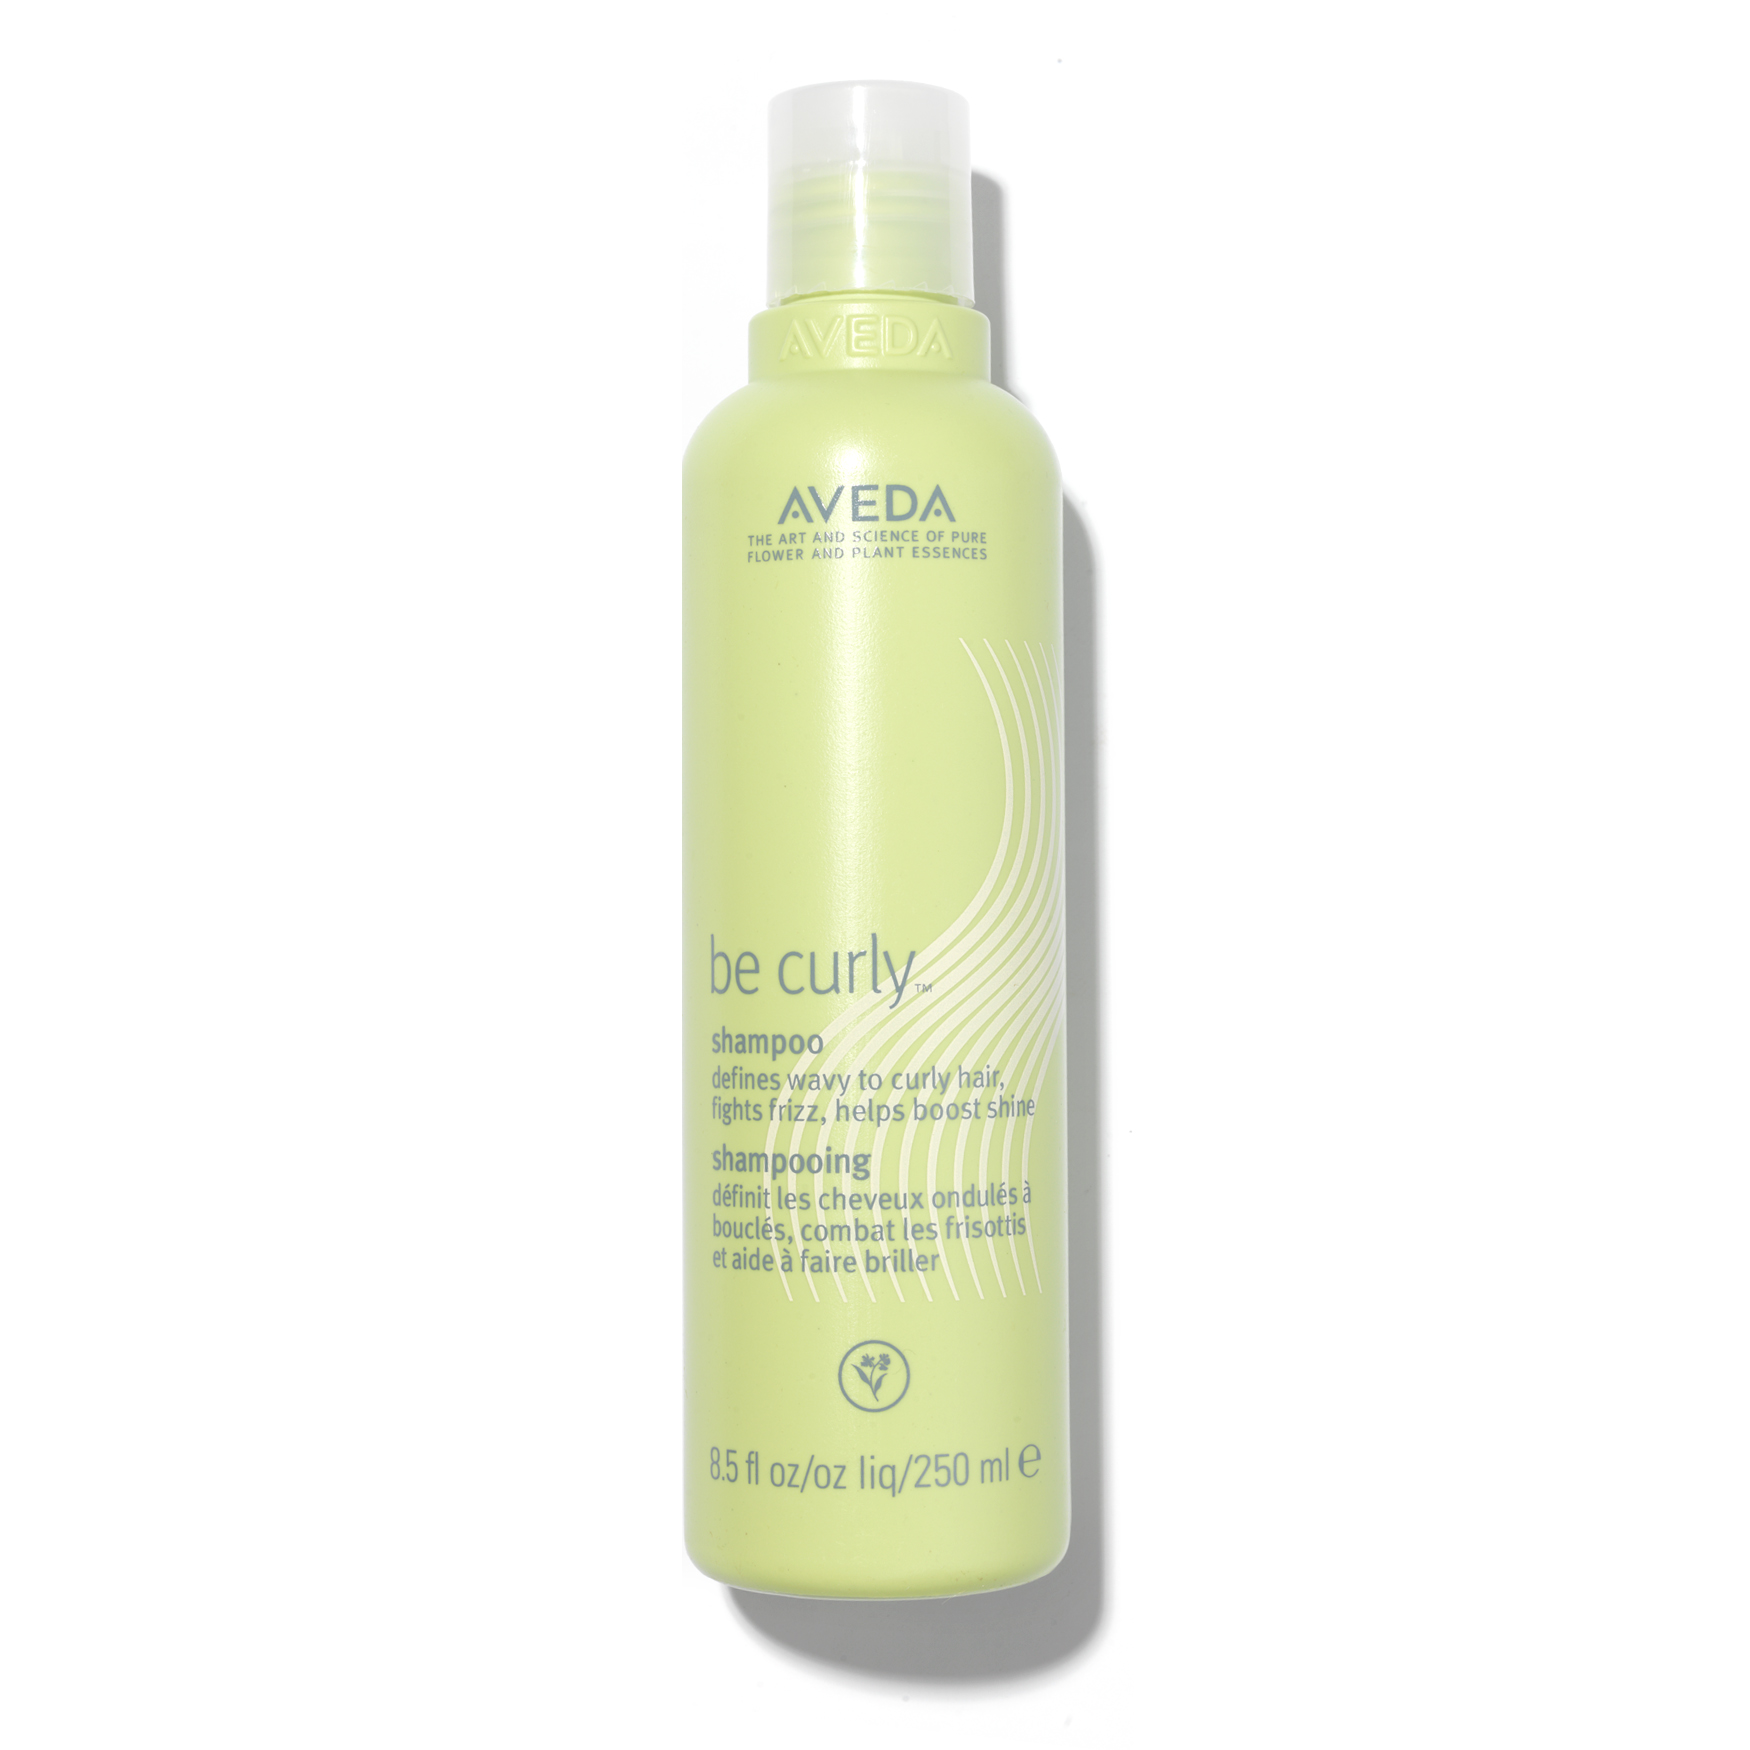 Aveda Shampooing Be Curly | Space NK